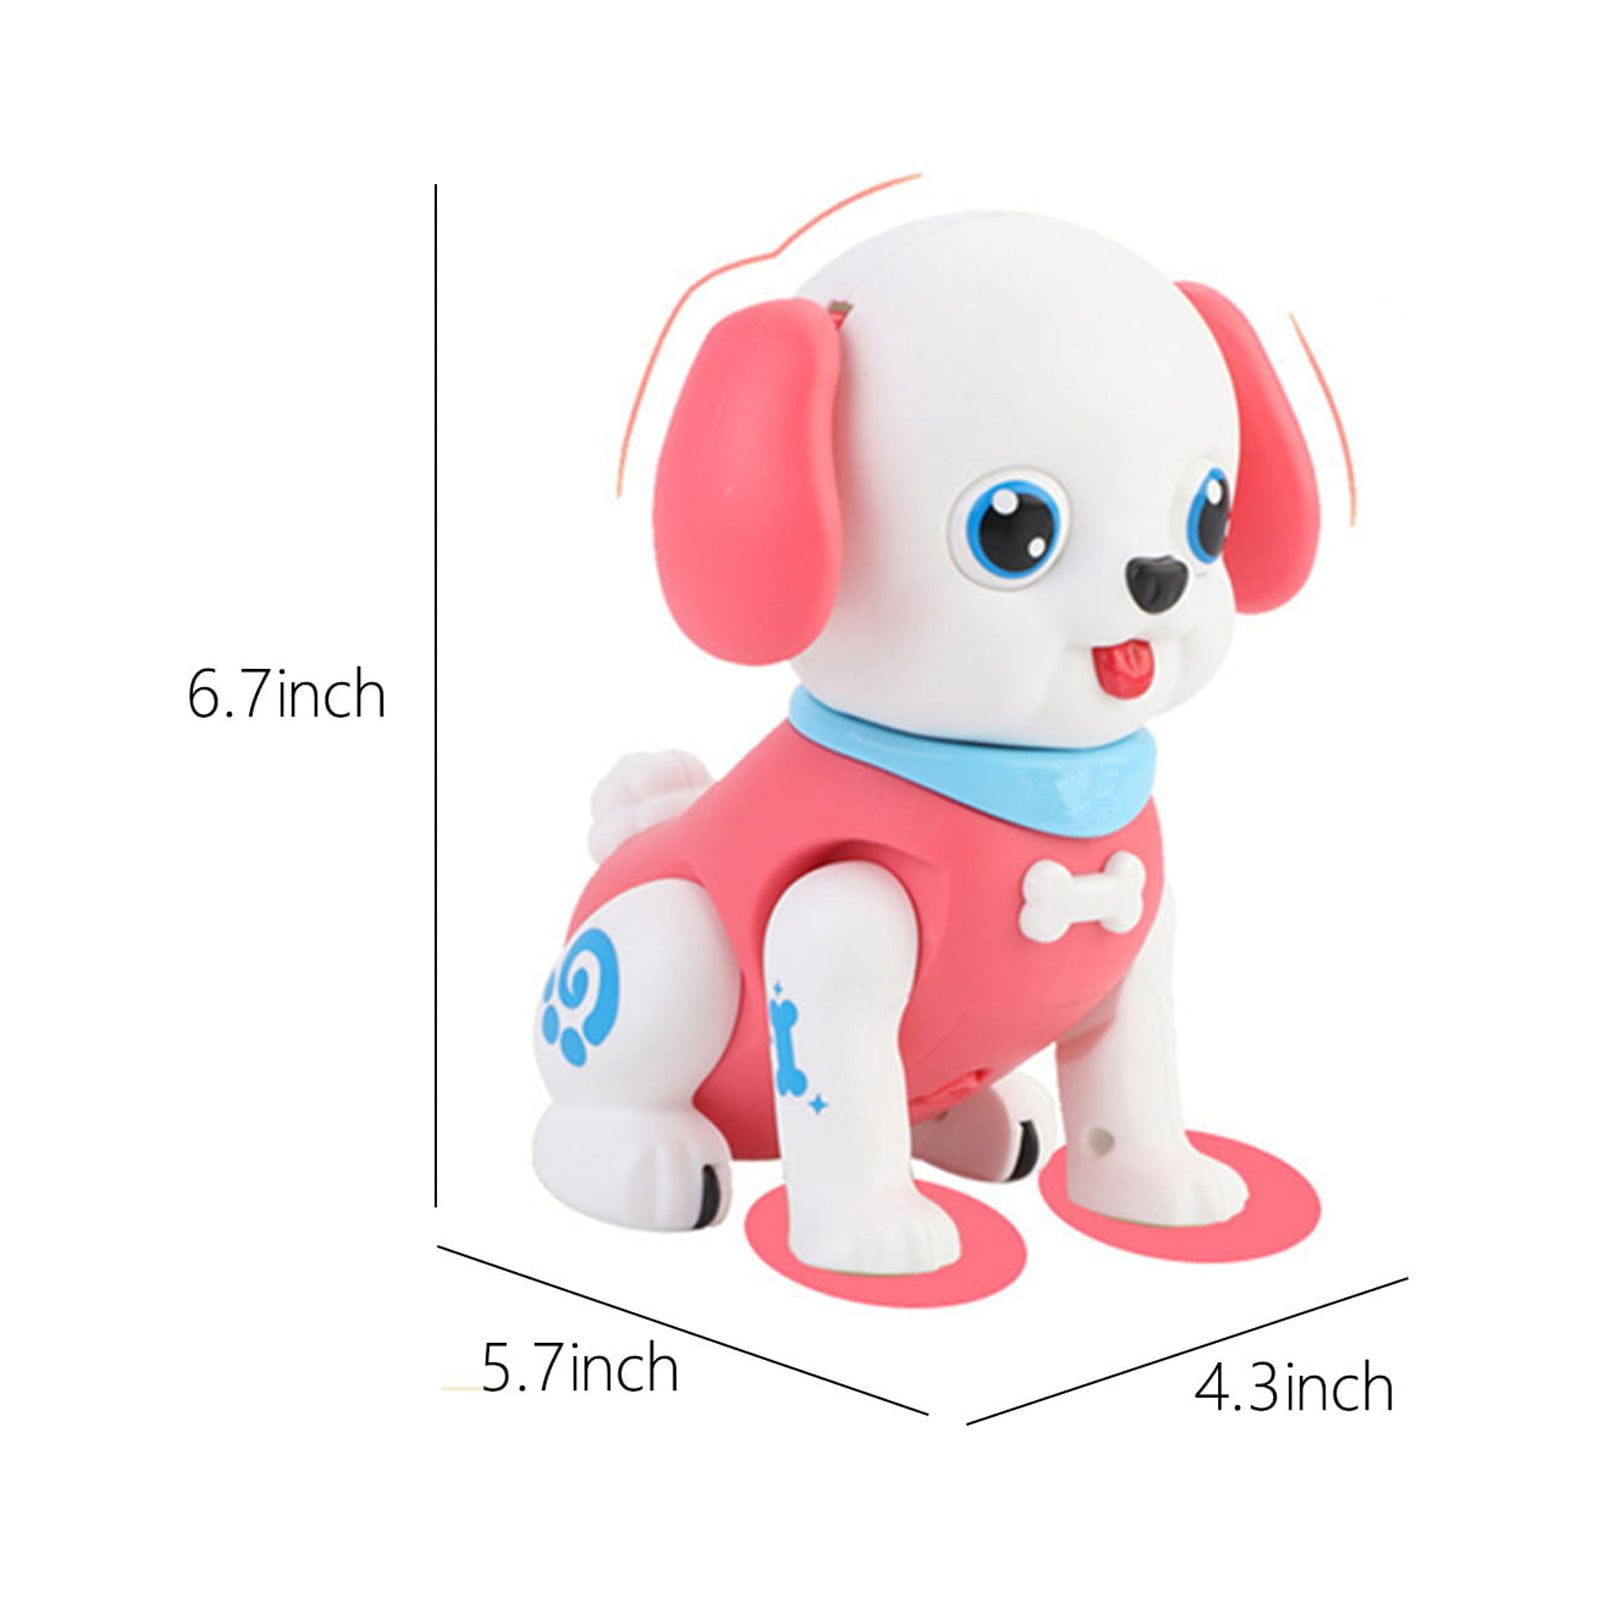 Kayannuo Back to School Clearance Toys Intelligent Electronic Dog Pet Toy  with Gesture Sensing for Boys And Gift